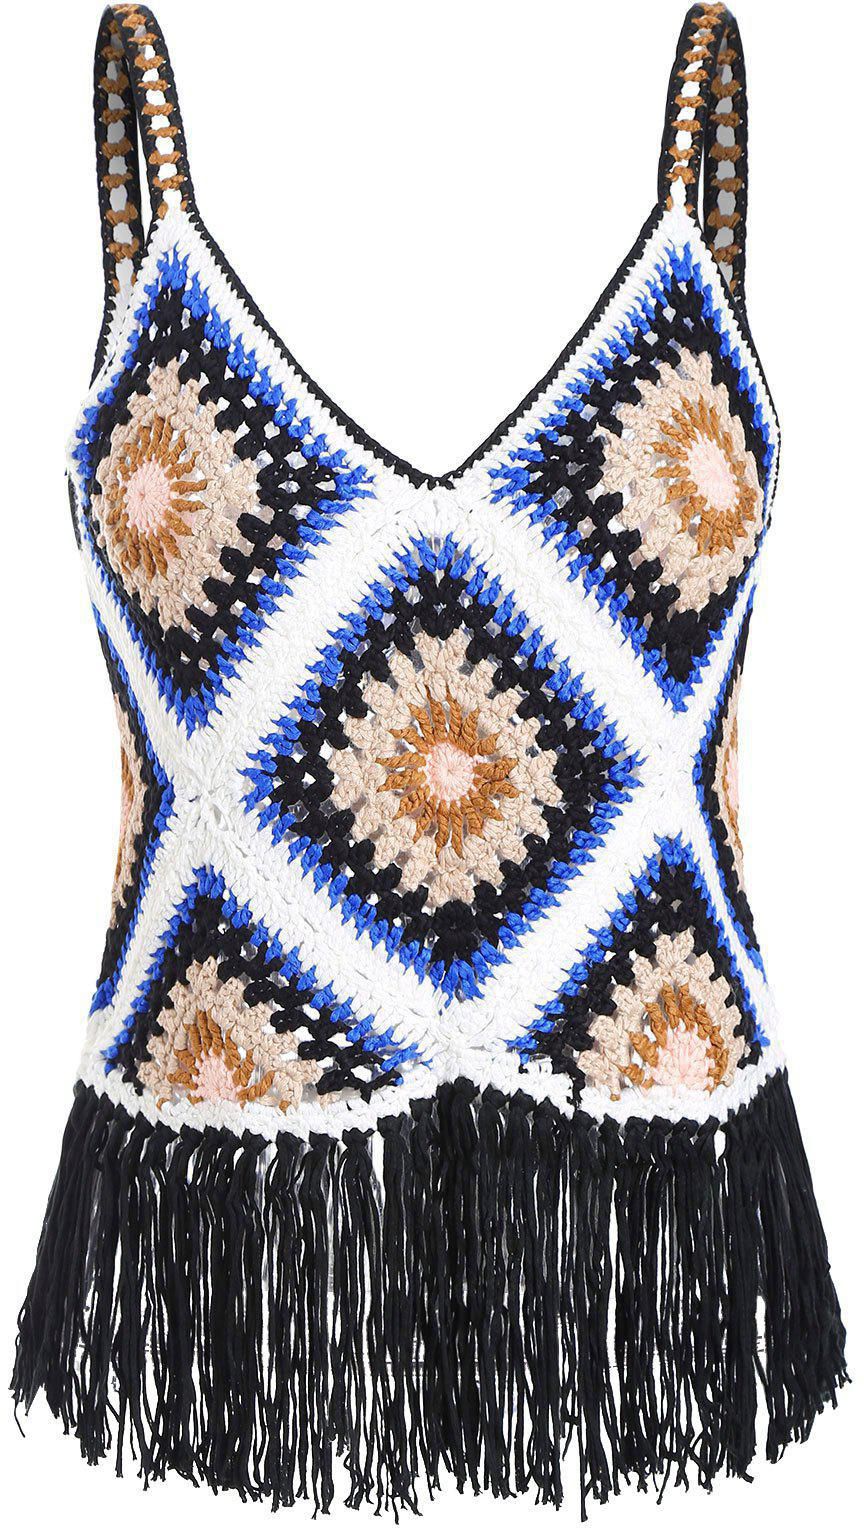 Crochet Knit Sleeveless Cover Up Top - One Size